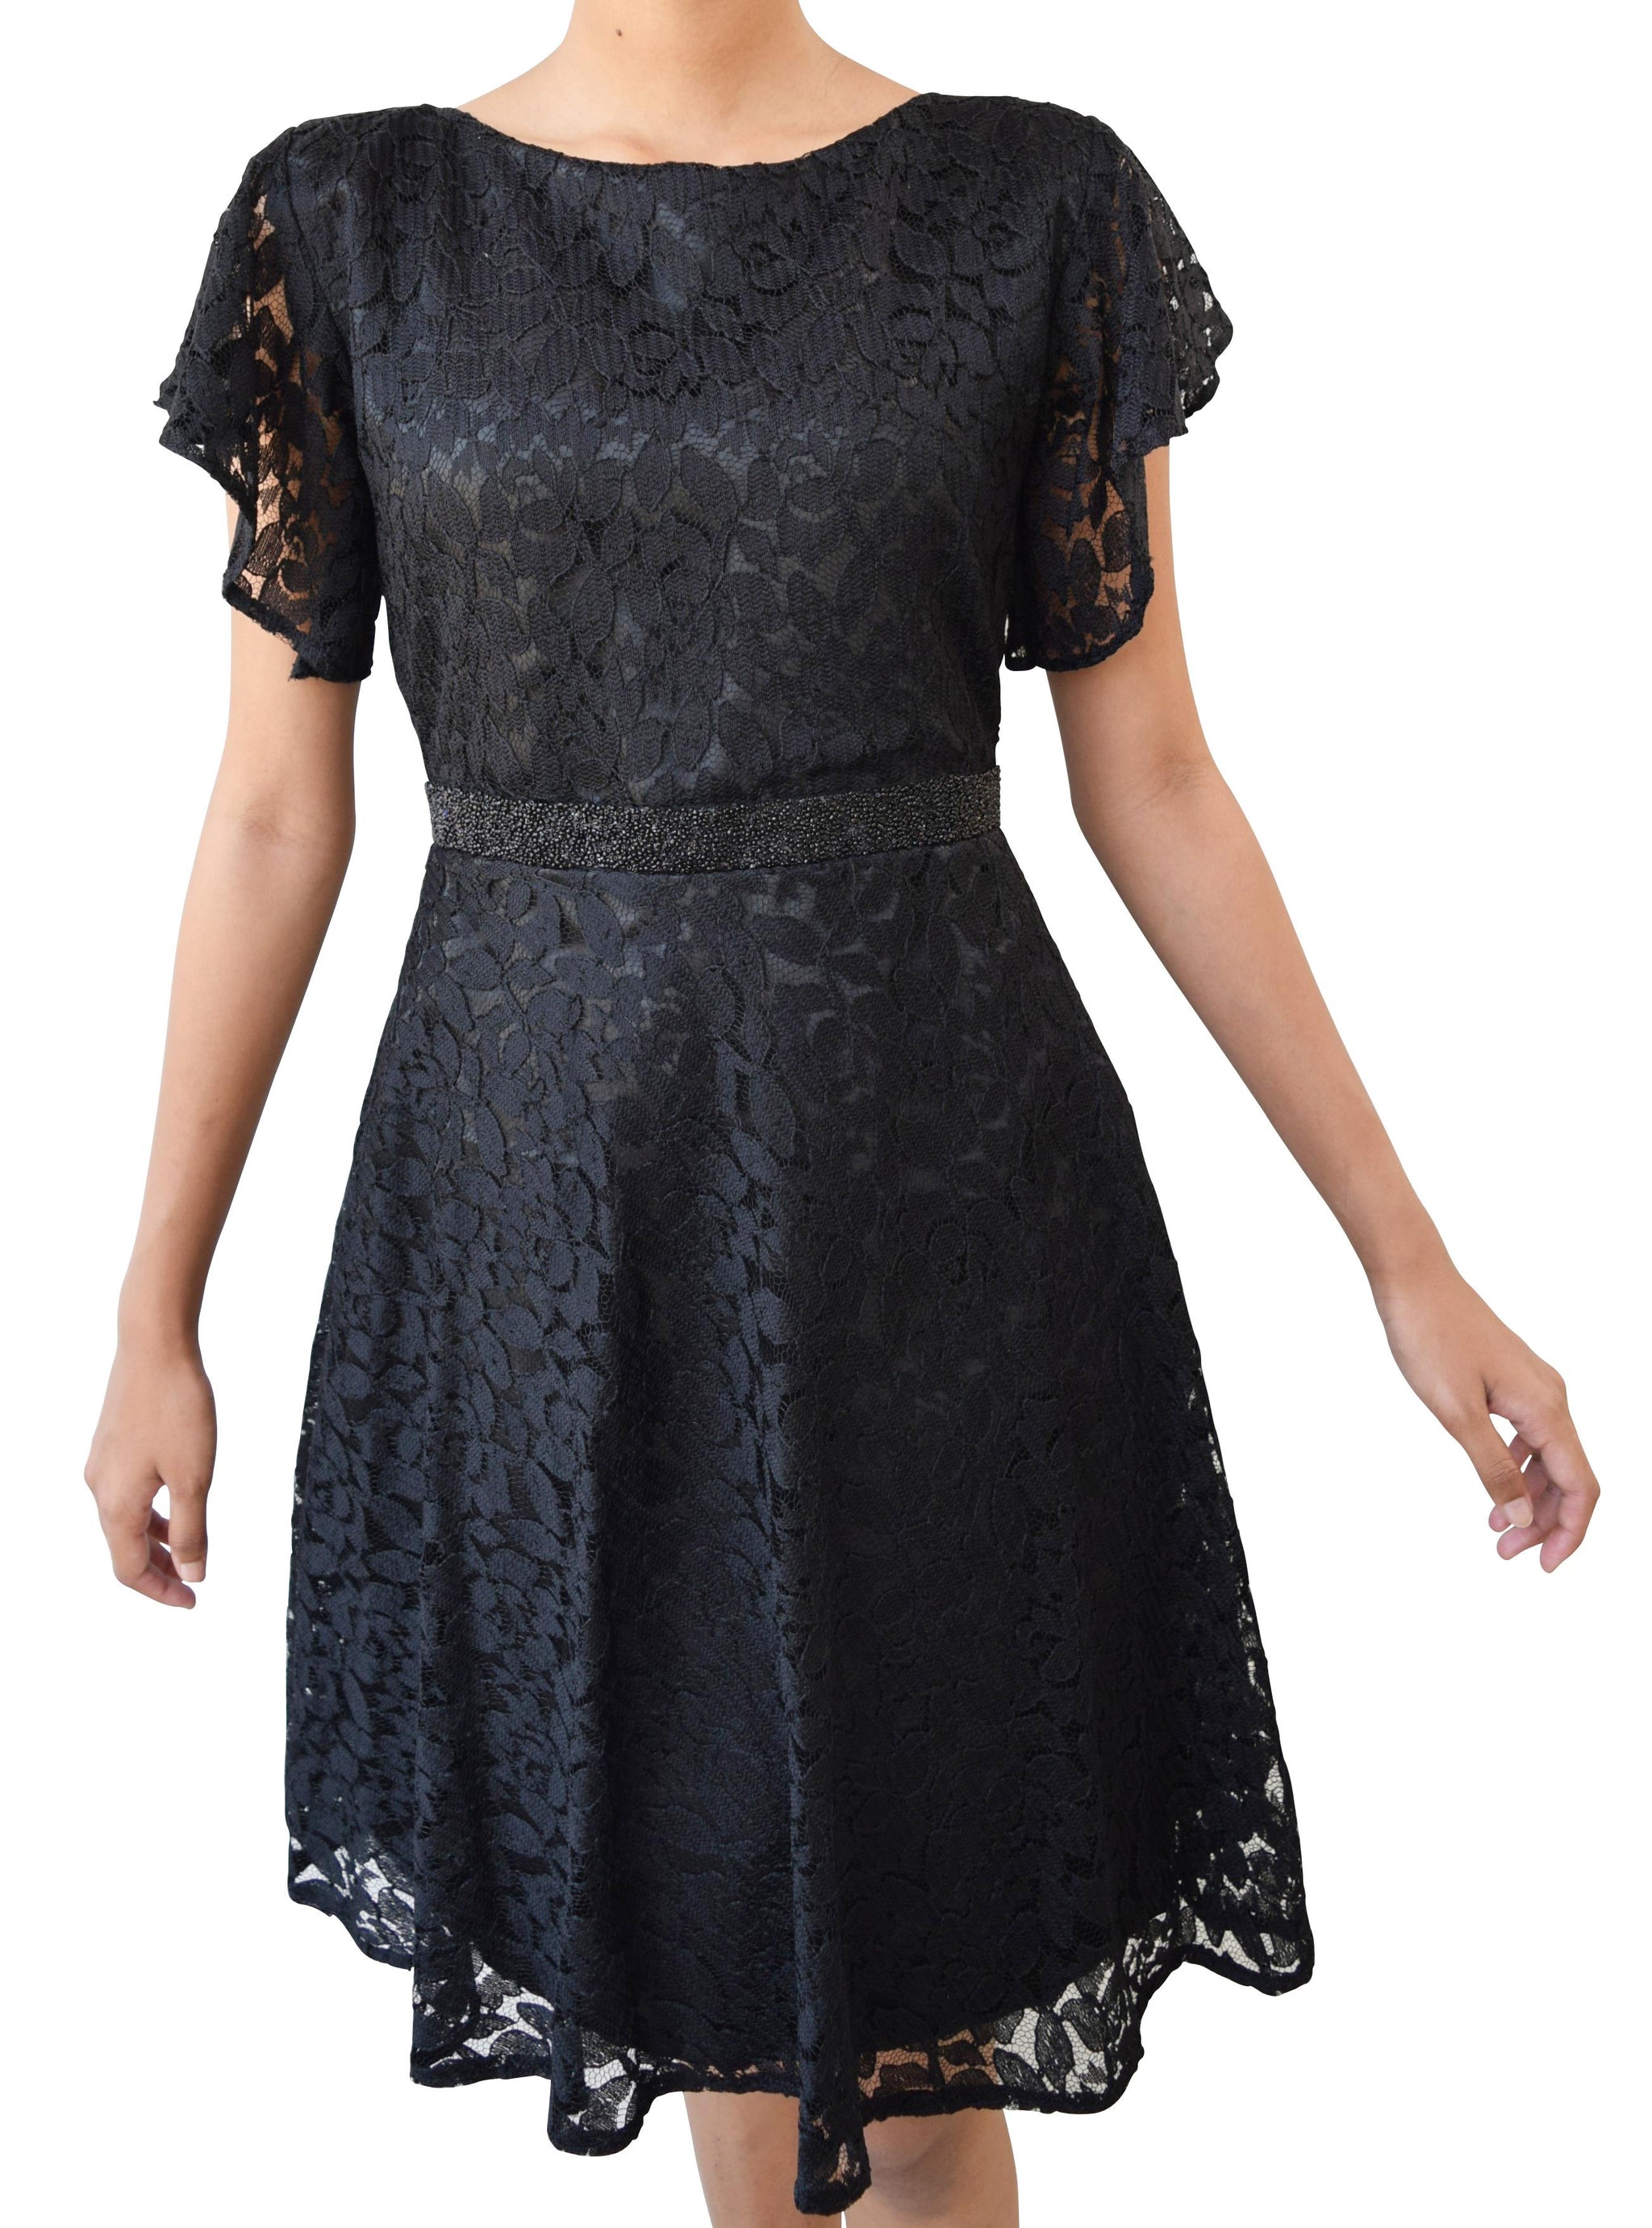 lace dress for teenage girl